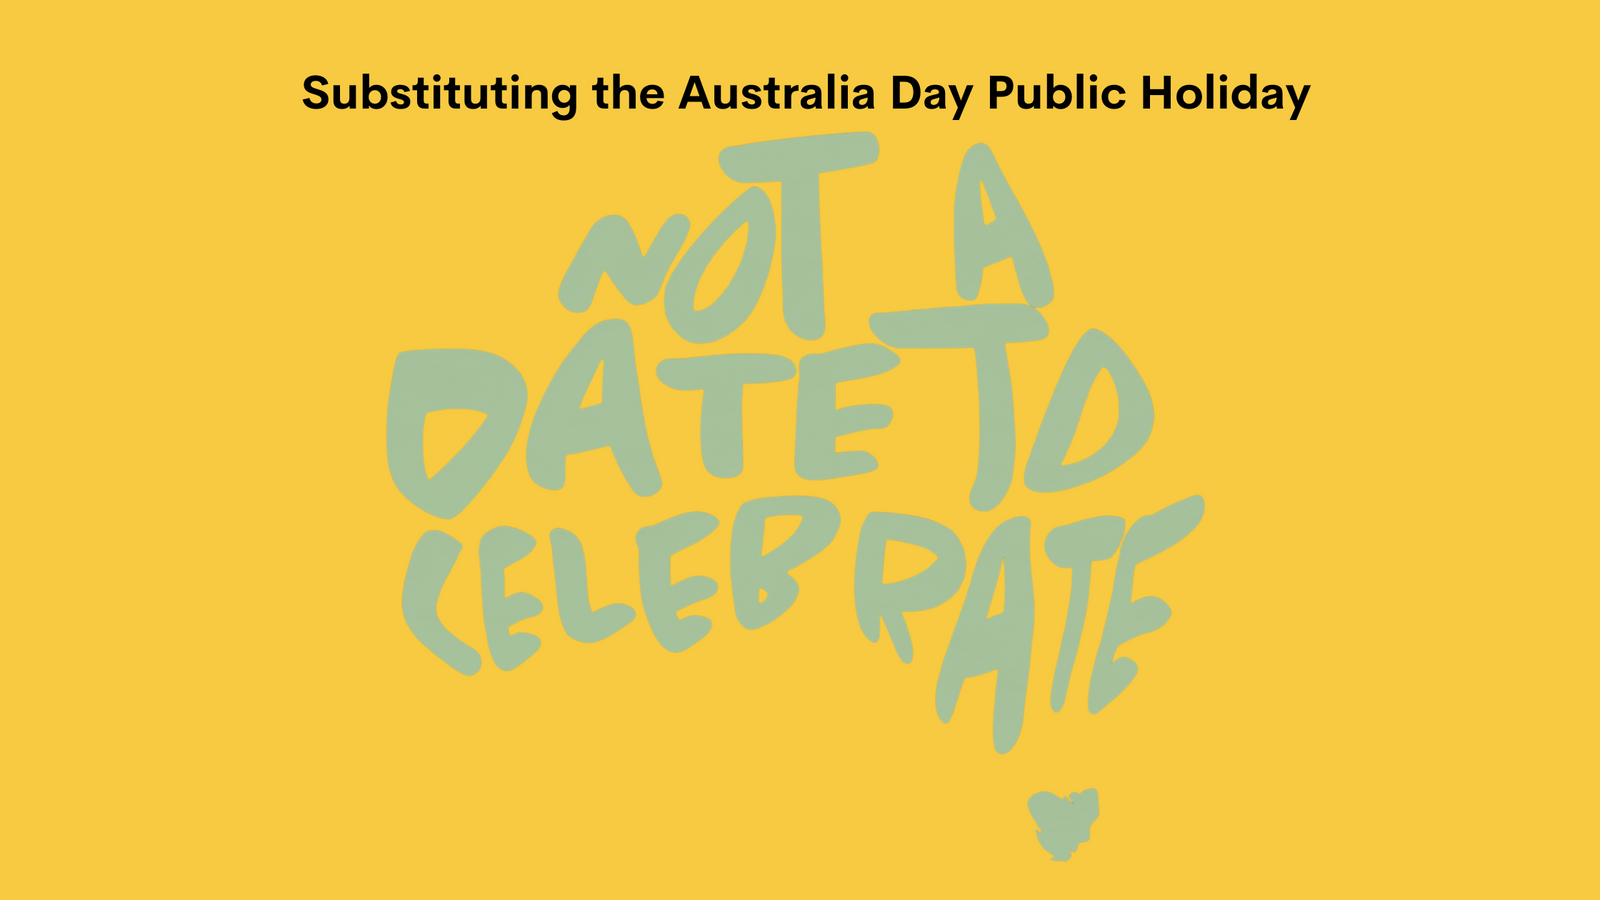 Not A Date To Celebrate: Substituting the Australia Day Public Holiday